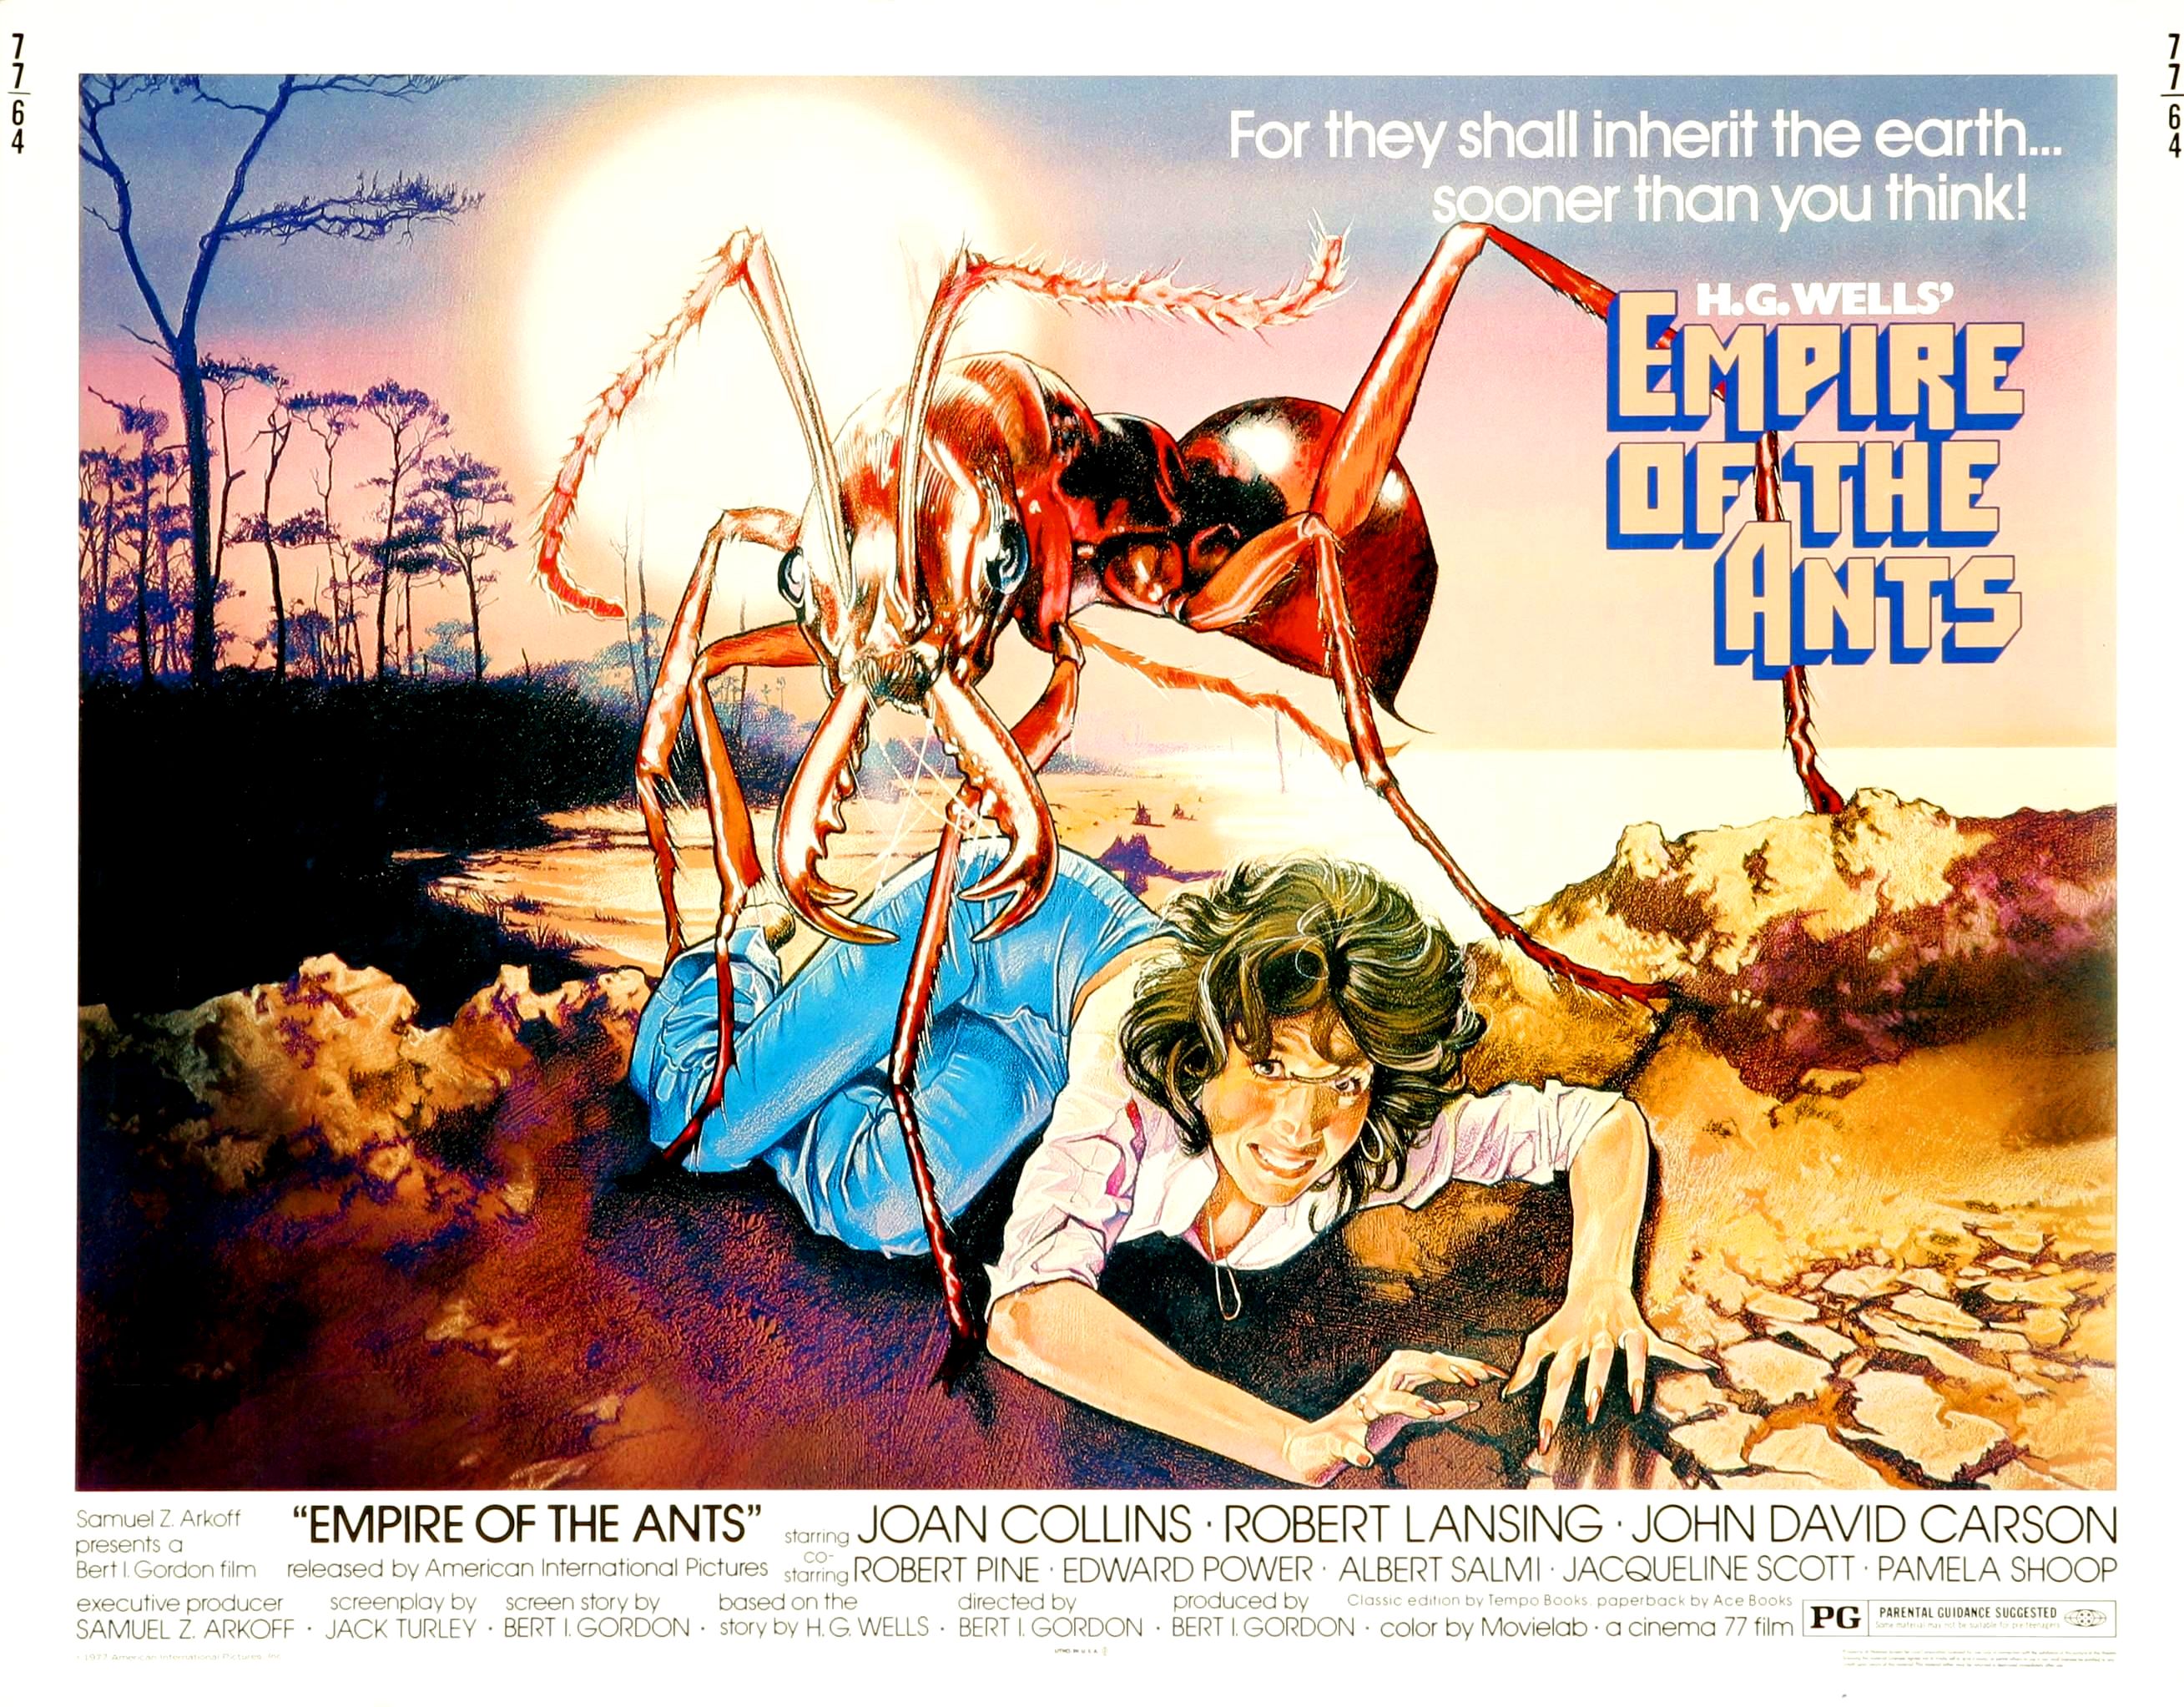 empire of the ants movie poster - For they shall inherit the earth... sooner than you think! Hewelry Empire Of The Lante runch "Empire Of The Ants" Seni Gordon Bed by American tomational E Va Joan Collins Robert Lansing John David Carson Robert Pine Edwar